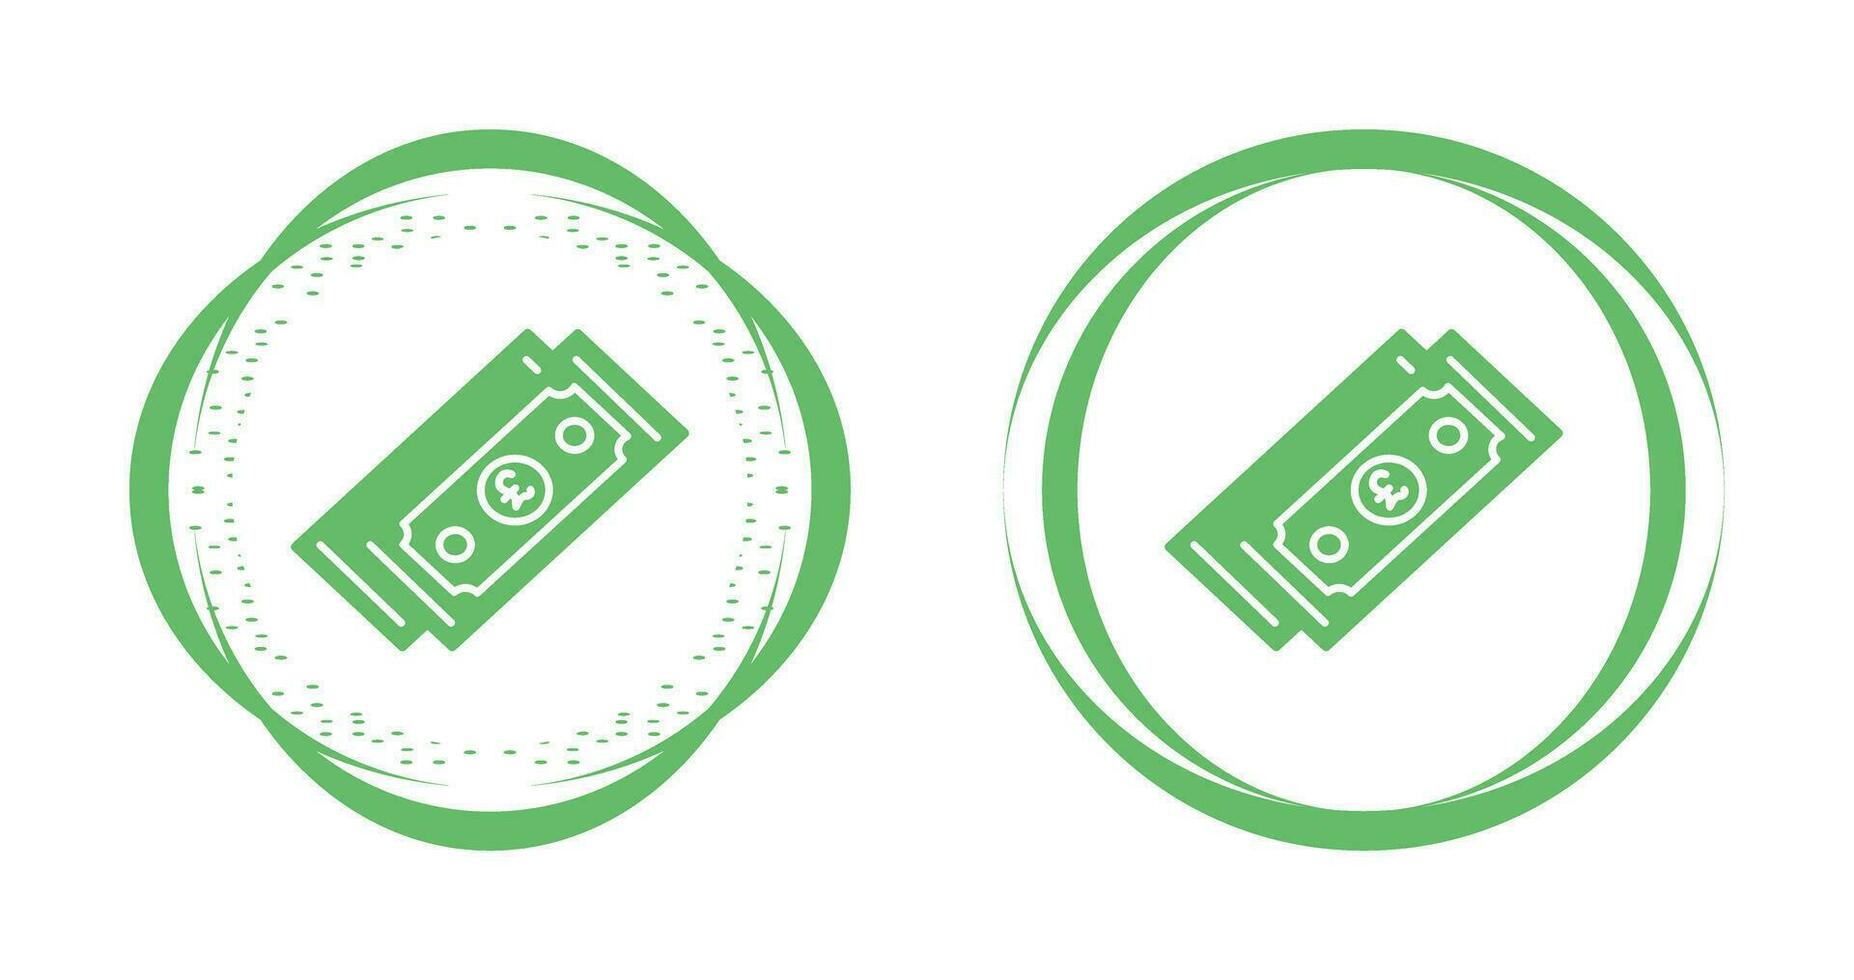 Pound Currency Vector Icon